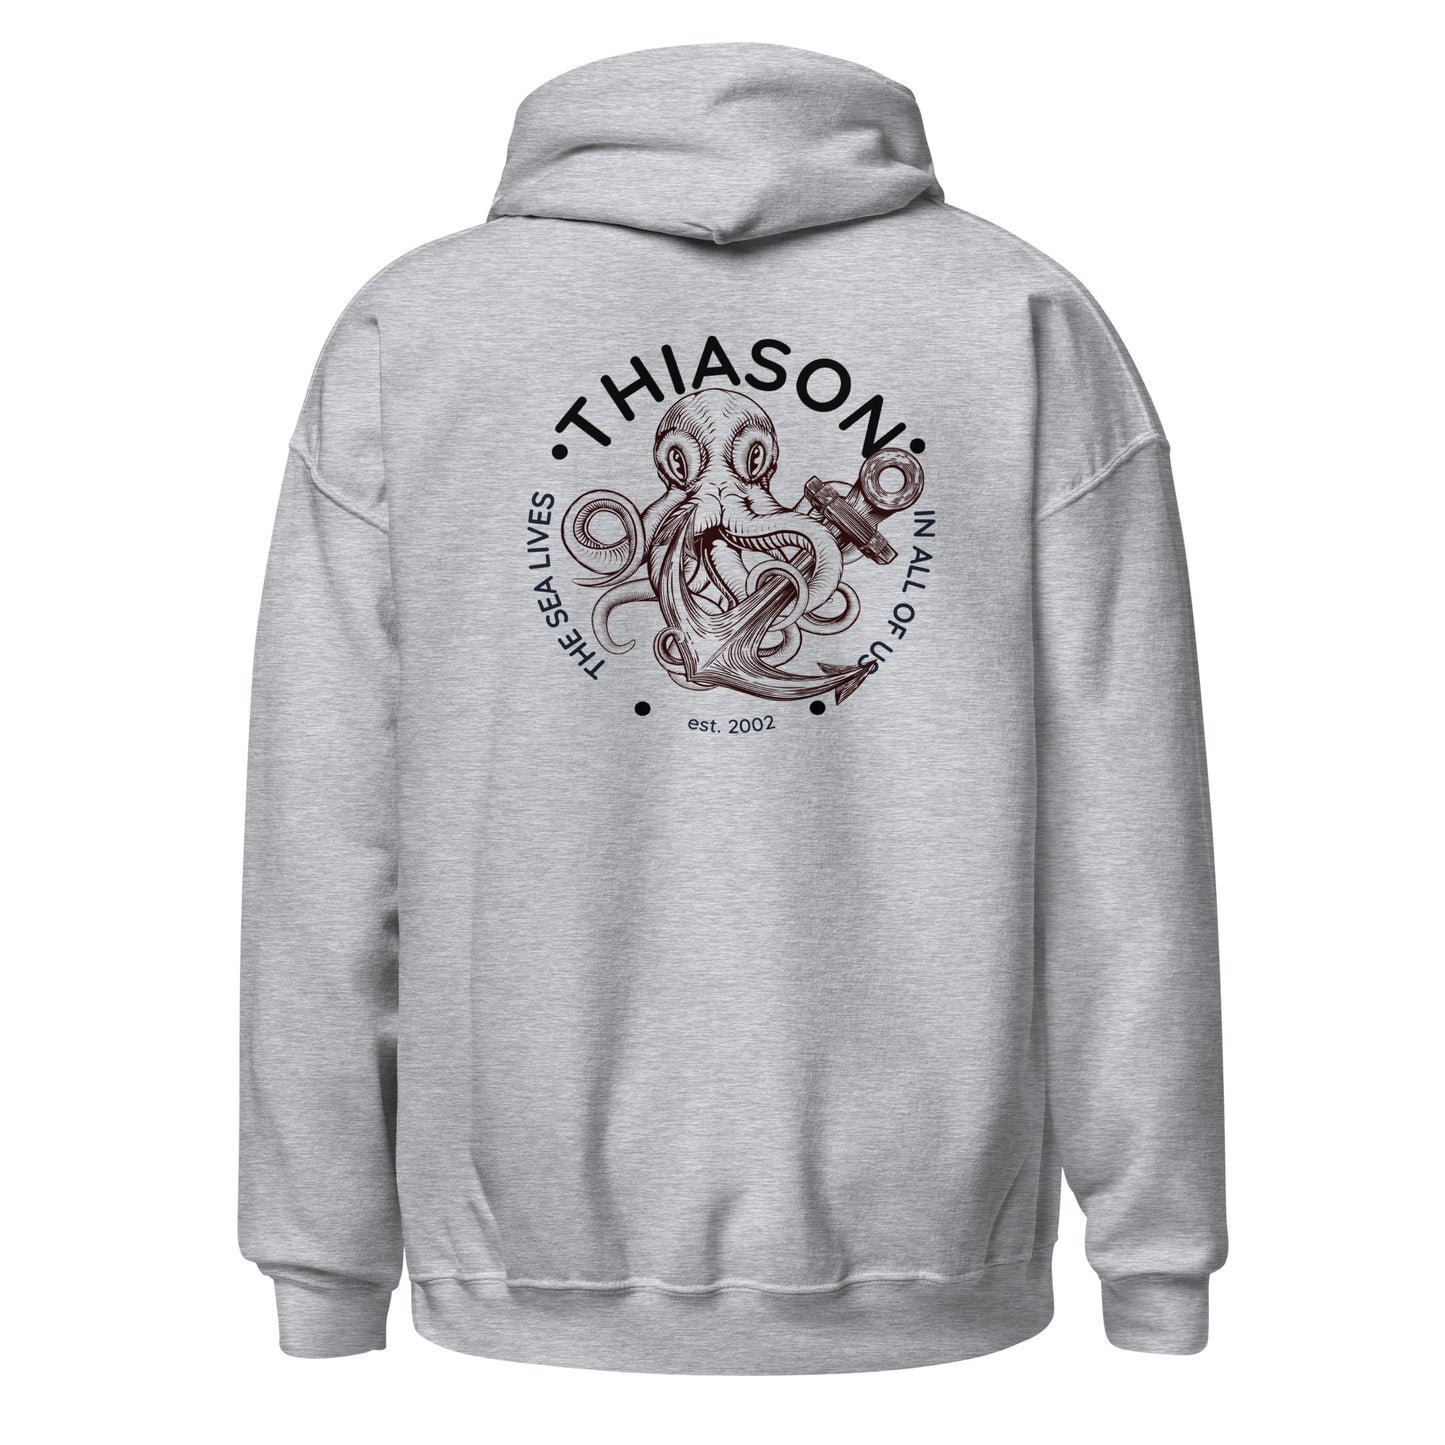 THE SEA IN ALL OF US Hoodie